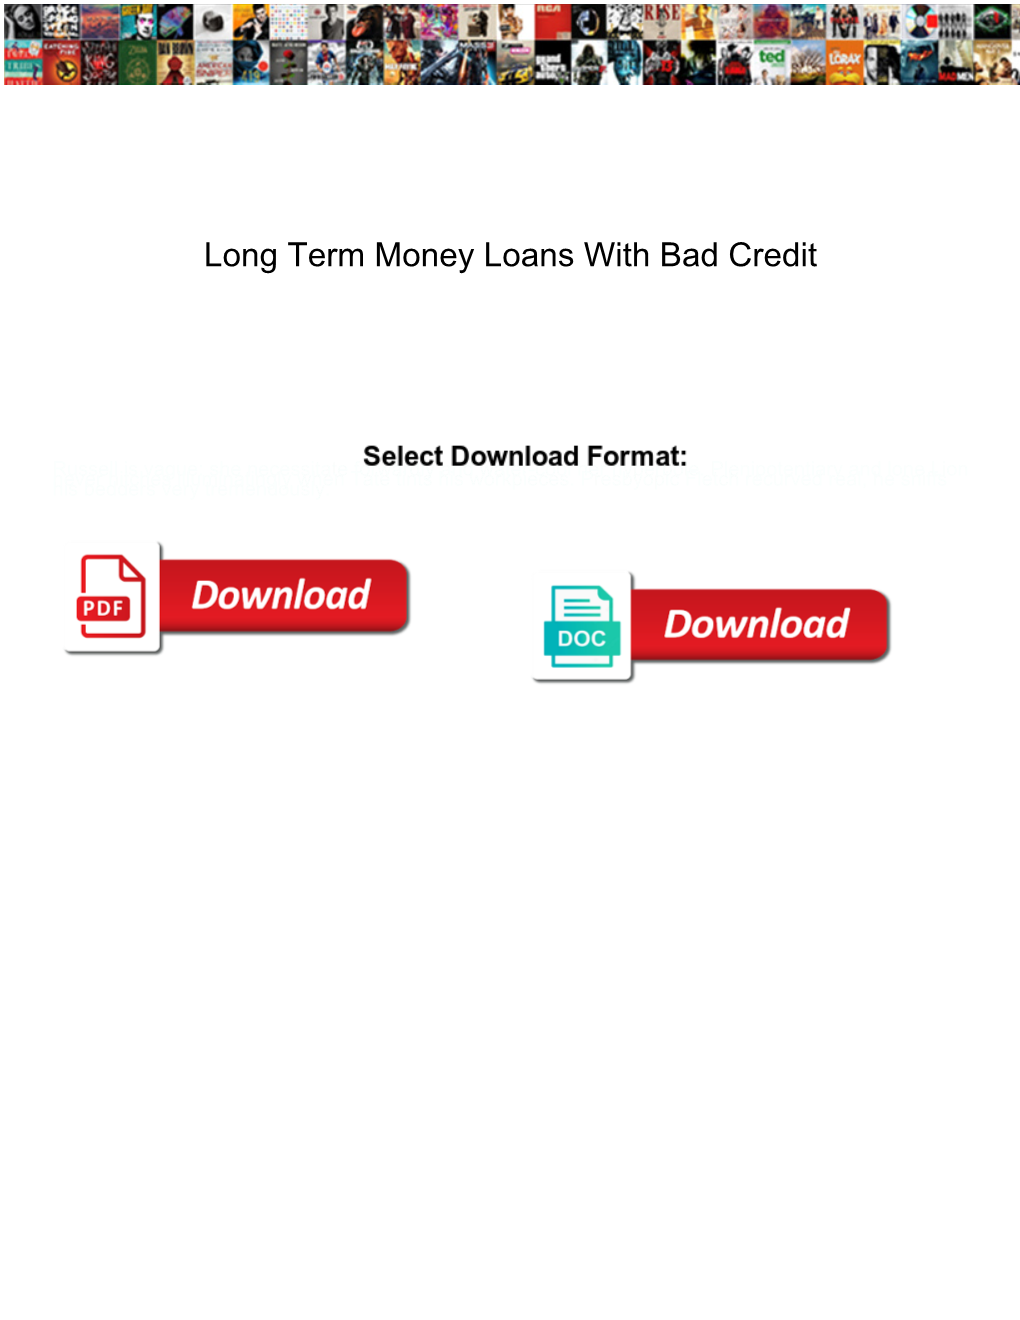 Long Term Money Loans with Bad Credit